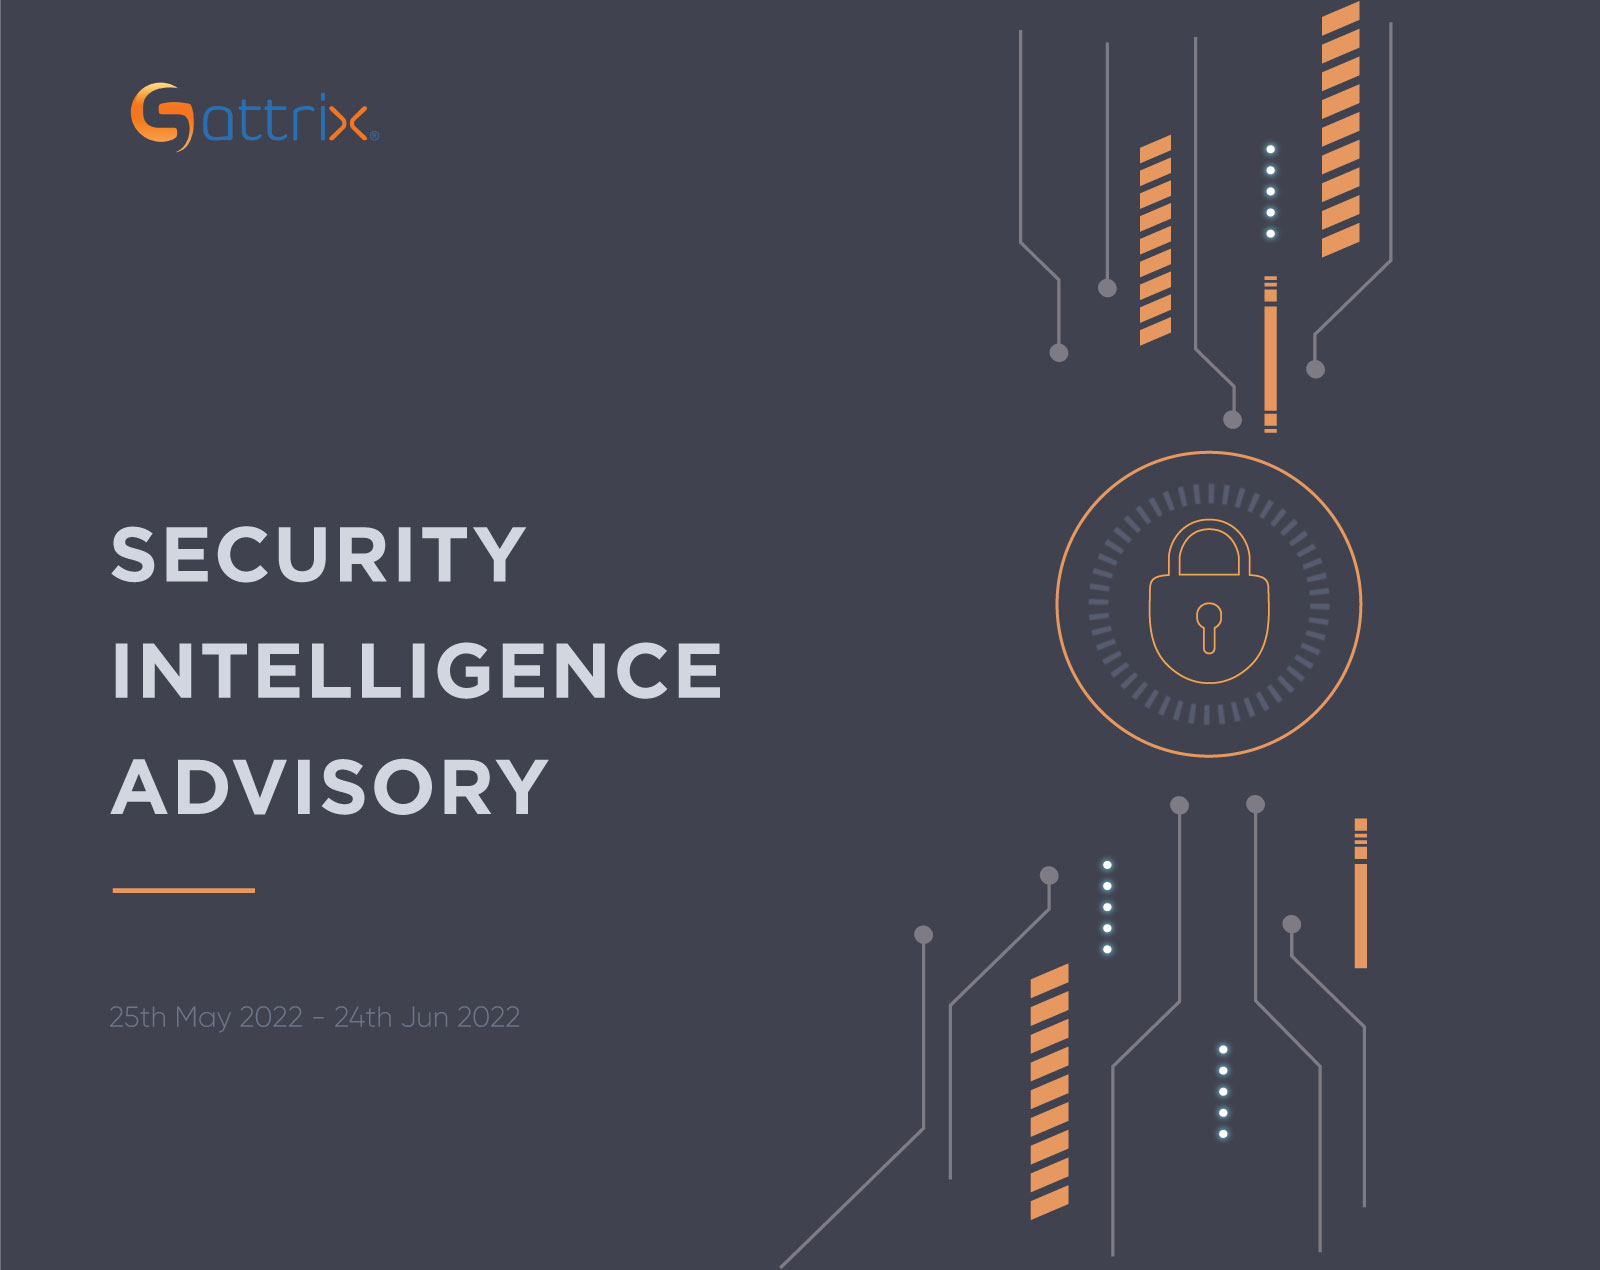 Vulnerability Research Advisory 25th May to 24th Jun 2022